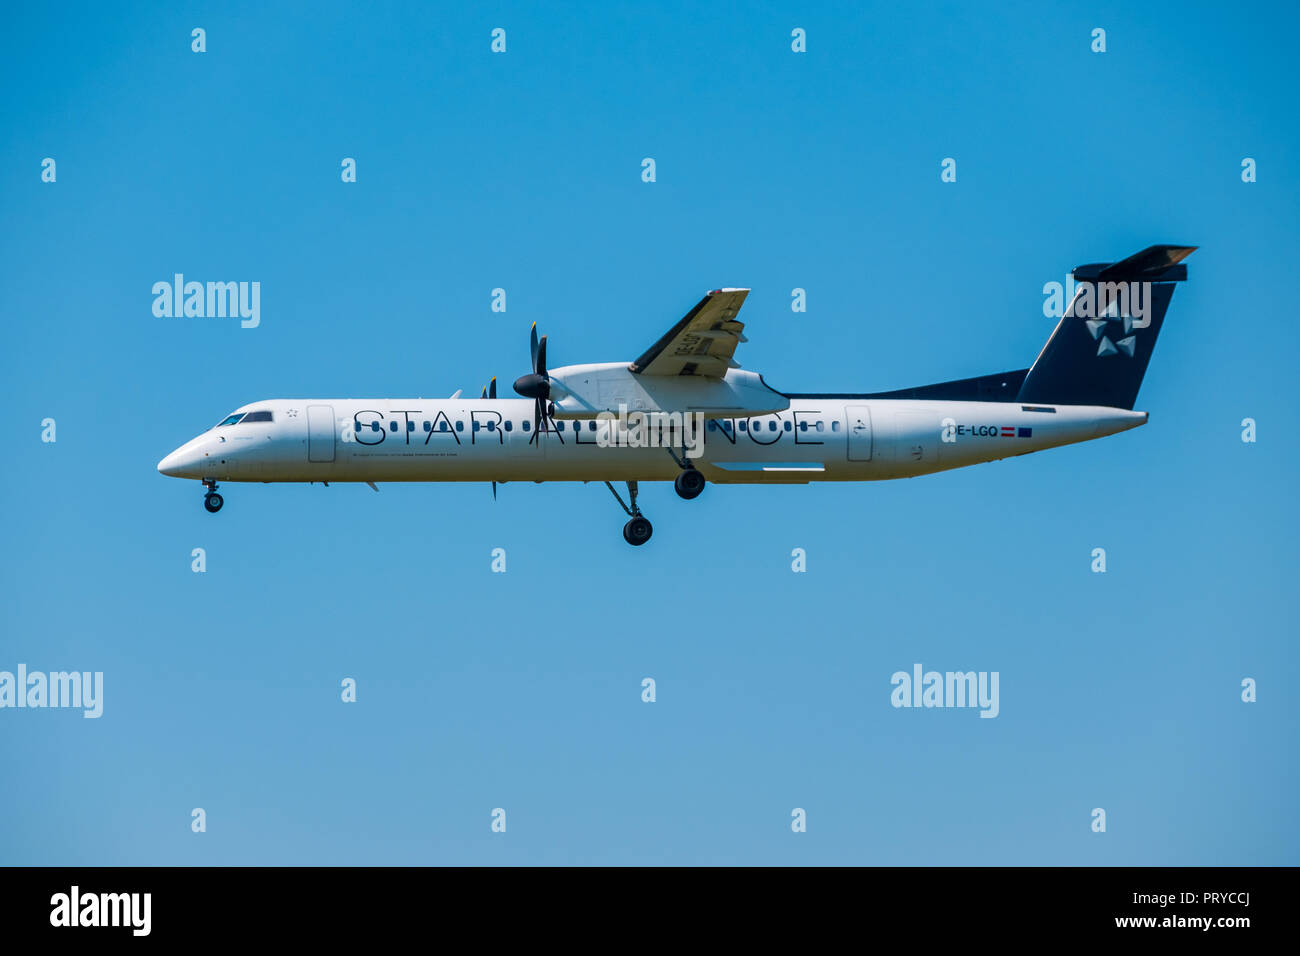 Star alliance airlines Bomardier Dash 8 Q400 airplane preparing for landing at day time in international airport Stock Photo